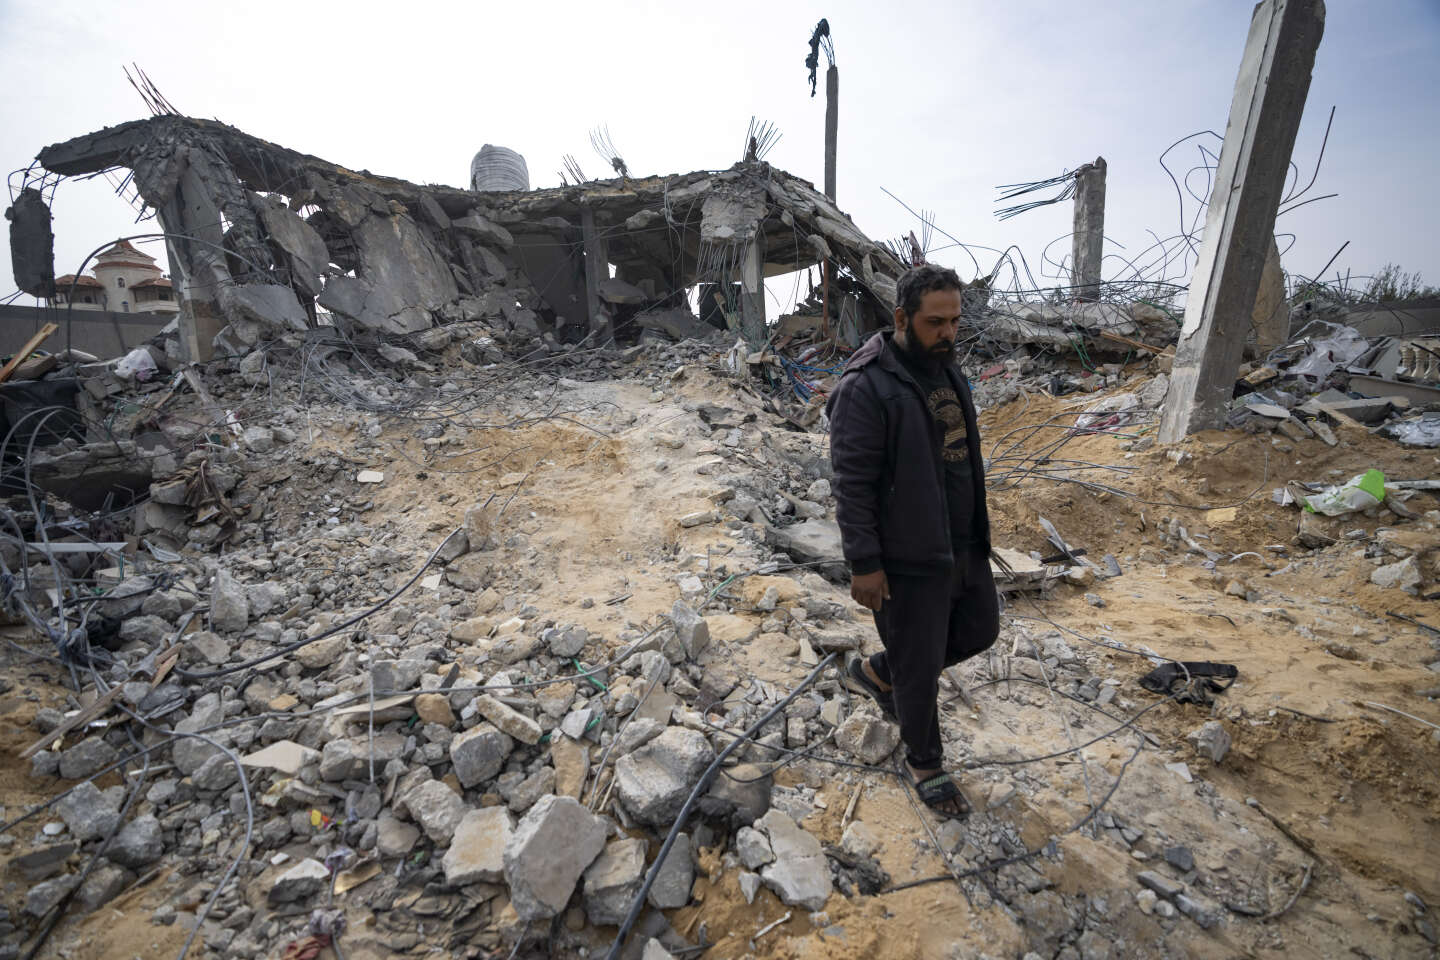 The UN resolution for an “immediate ceasefire” has yet to take effect in Gaza or Doha